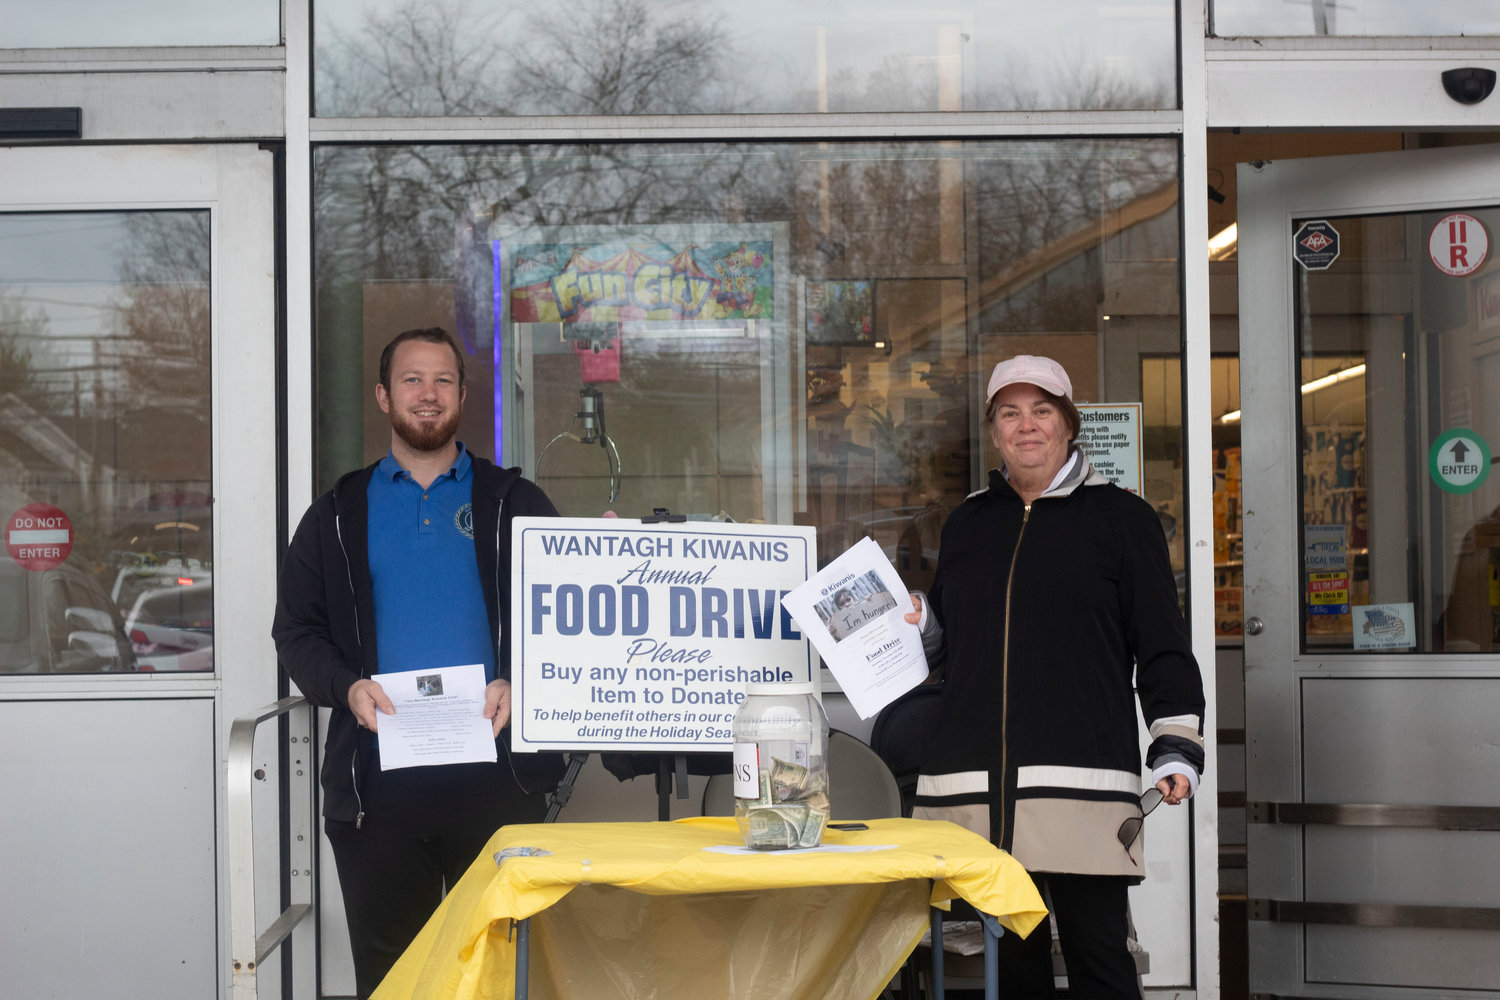 Mark Engleman, left, and Marlena Schein, of Wantagh Kiwanis, hosted a food drive on Nov. 13 to supplement the efforts of the Giving Garden.